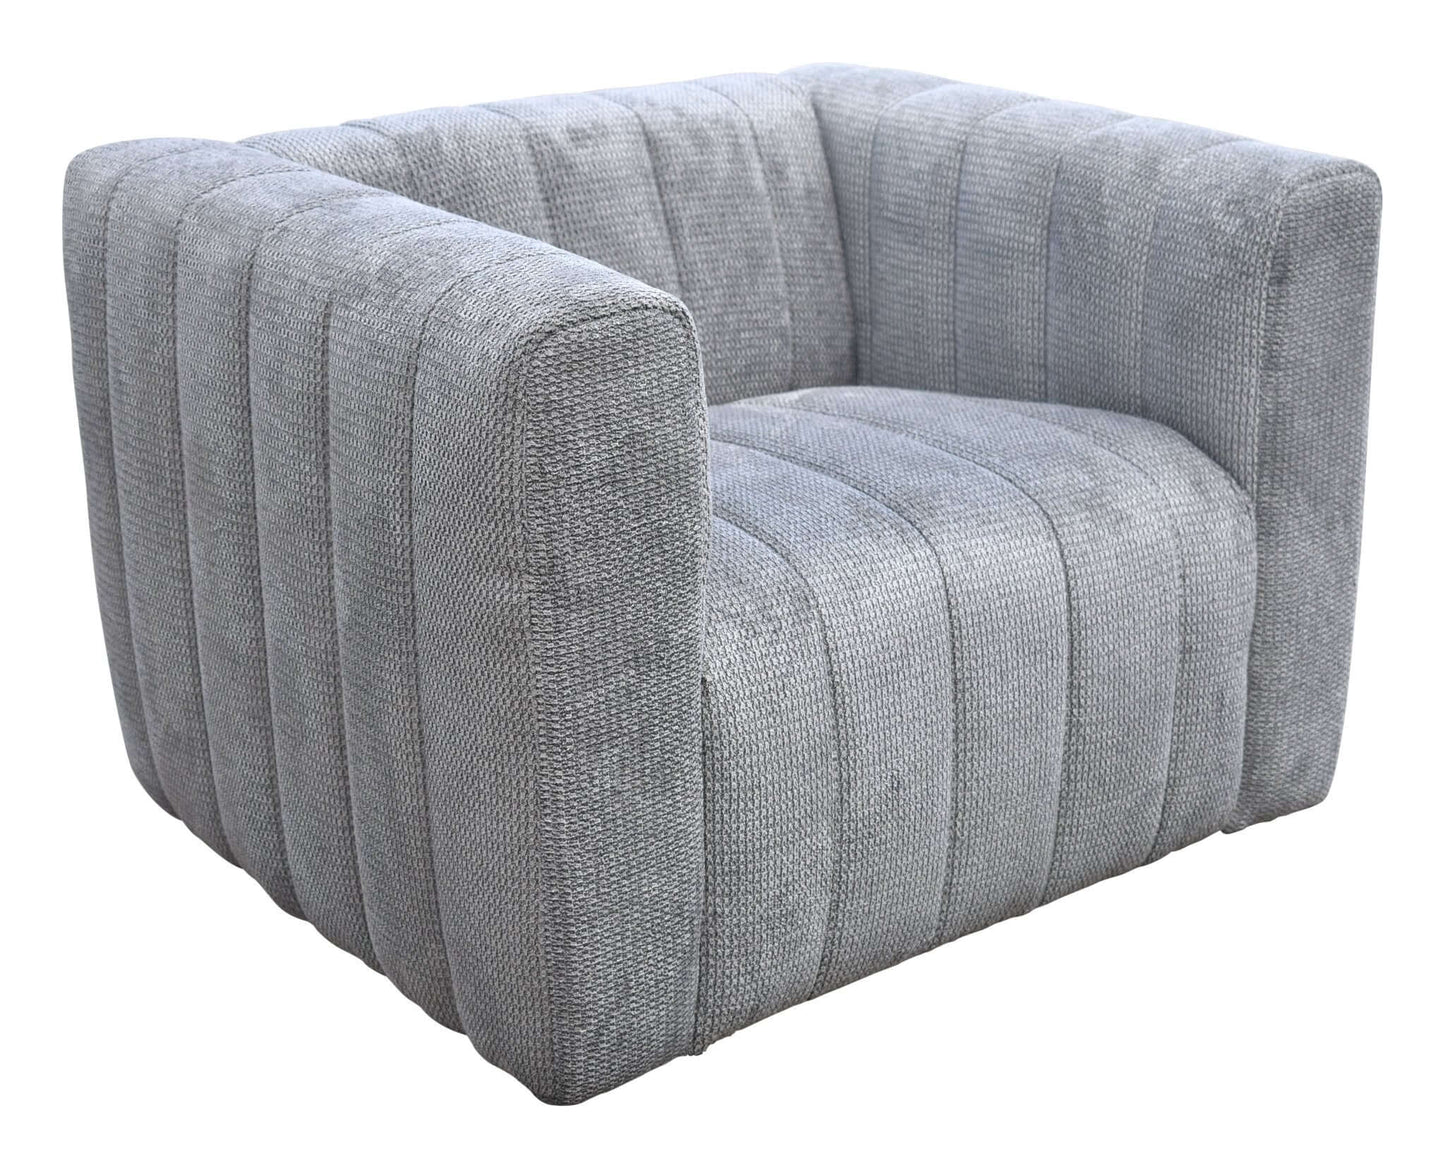 Puerto Plata Channel Tufted Luxury Polyester Fabric Lounge Chair - Revel Sofa 